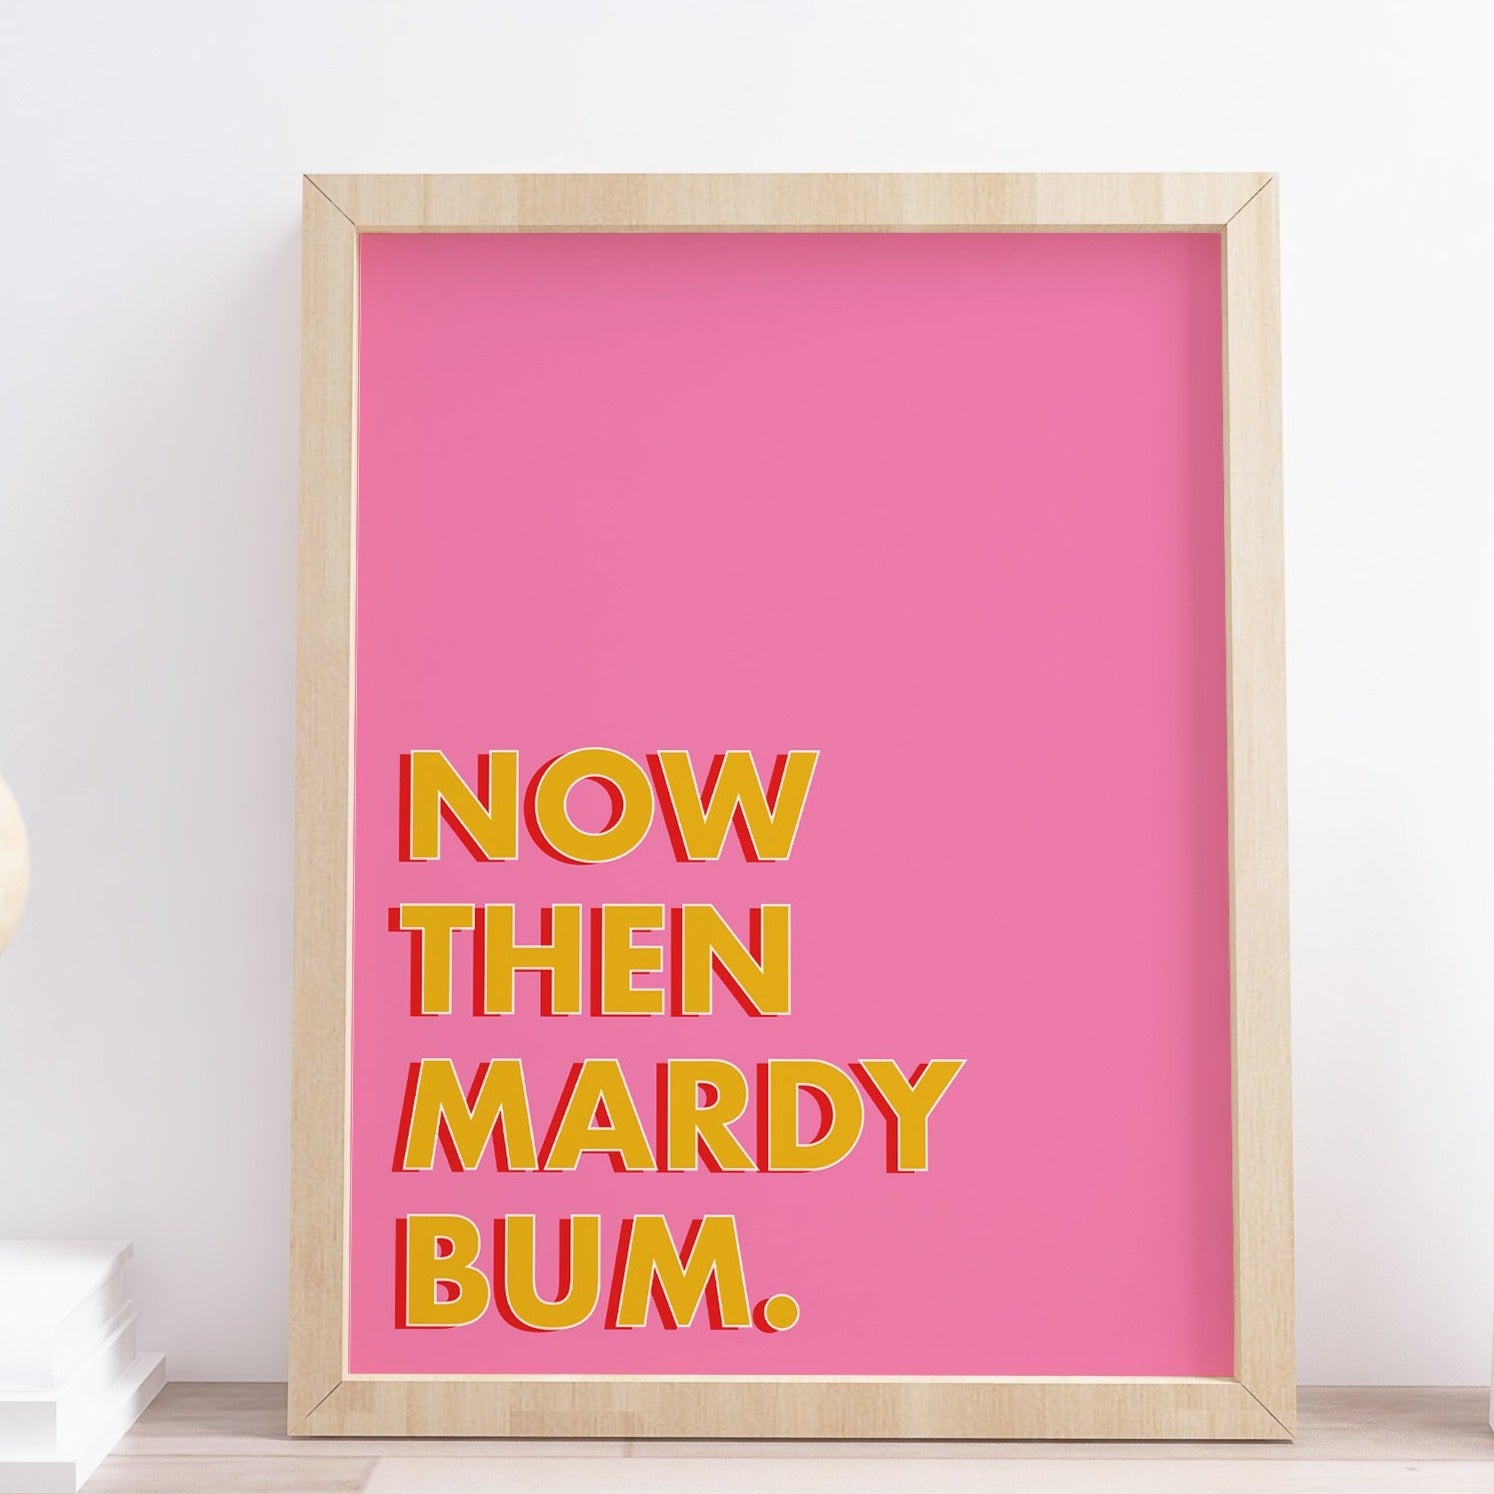 Now then mardy bum typography